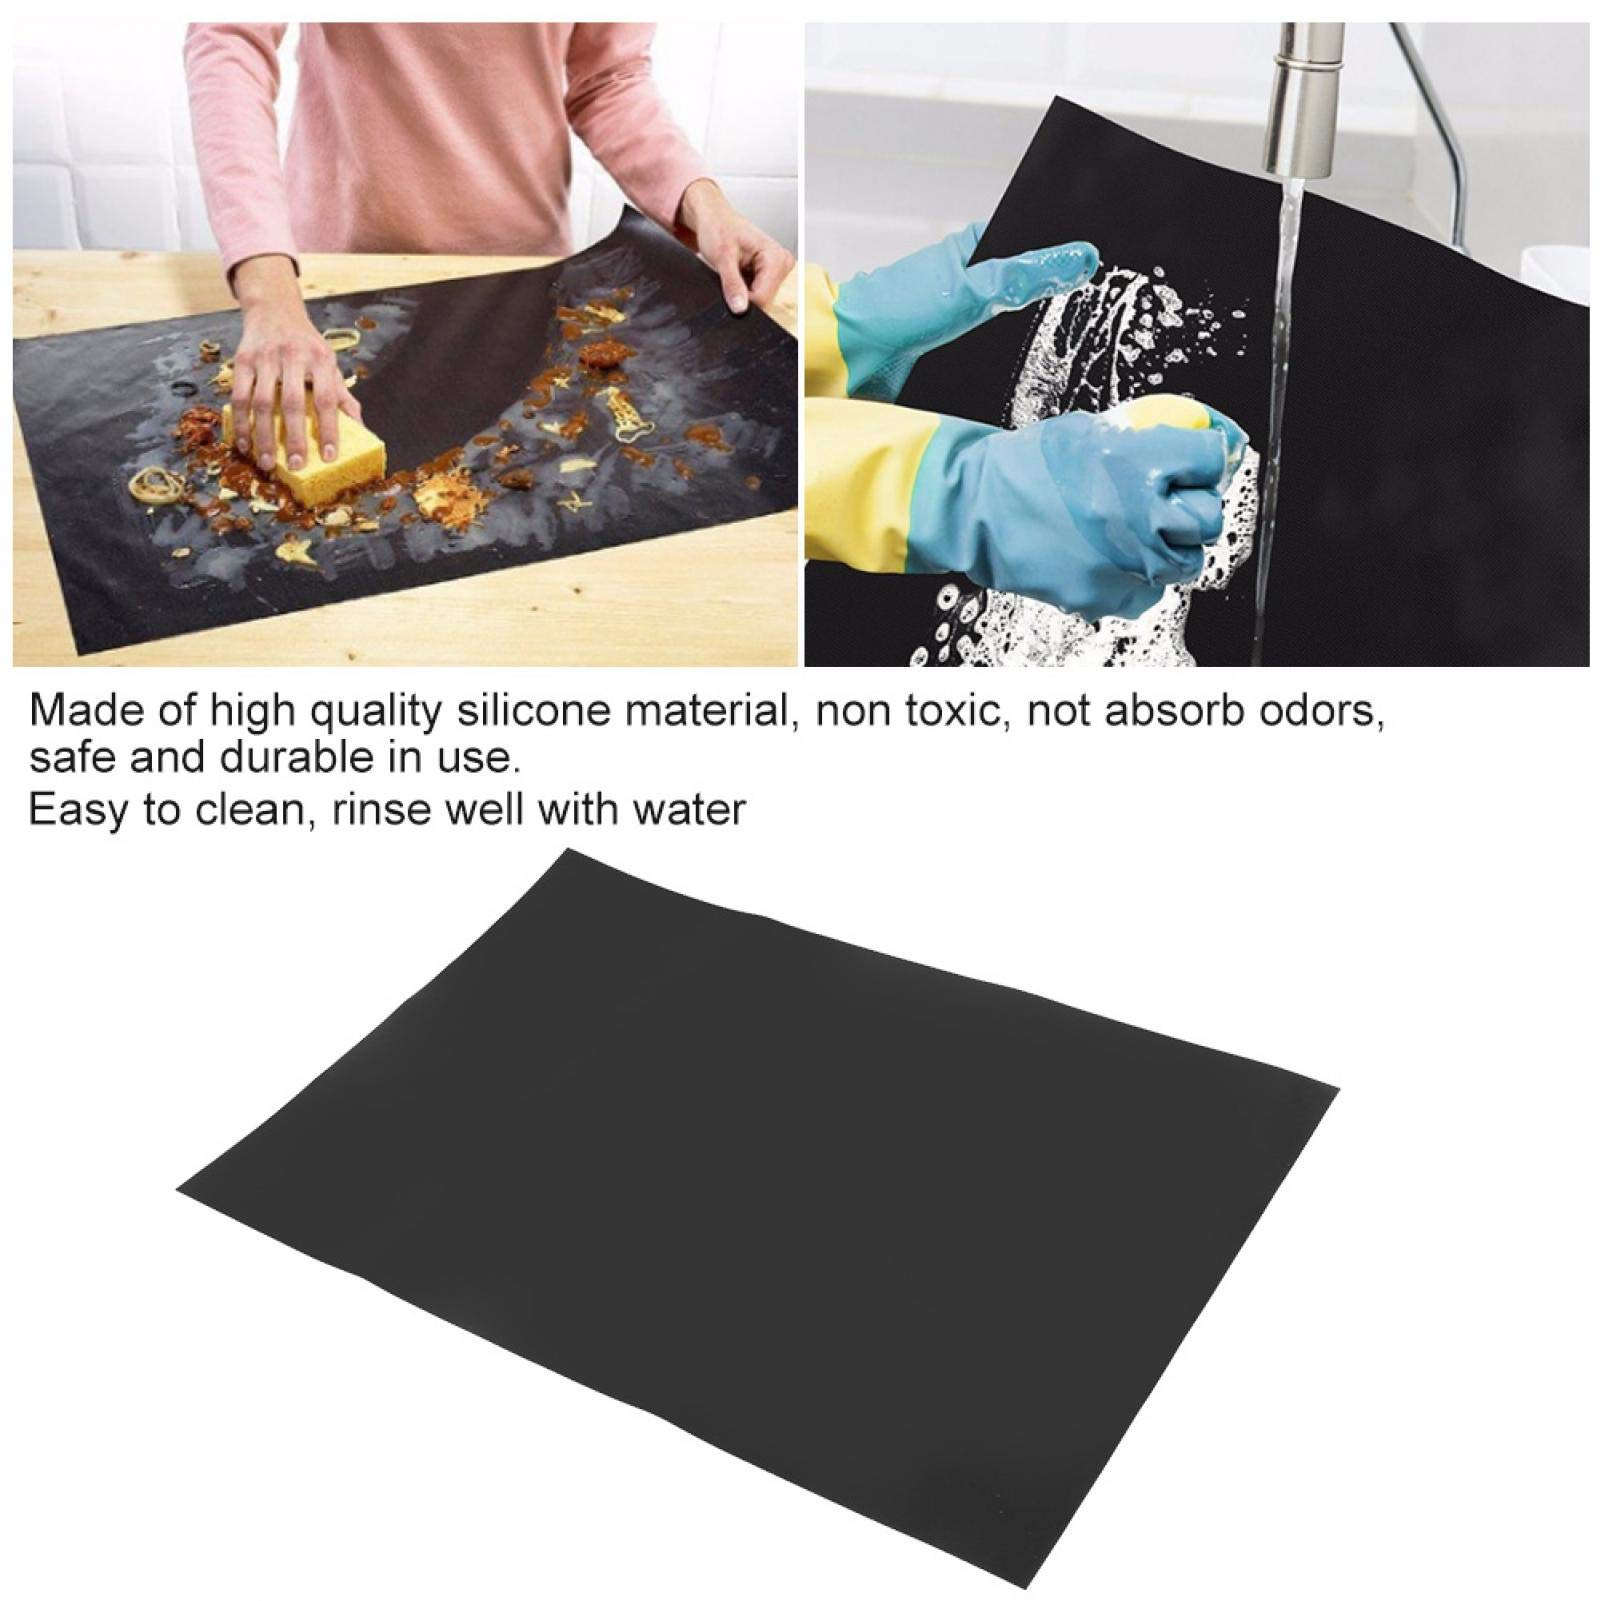 Induction Cooktop Mat, Heat Resistant Cooktops Scratch Protector Silicone Non Slip Pads Flexible Placemat Cover for Magnetic Stove Prevent Pots from Sliding during Cooking Ceramic Granite Tabletop